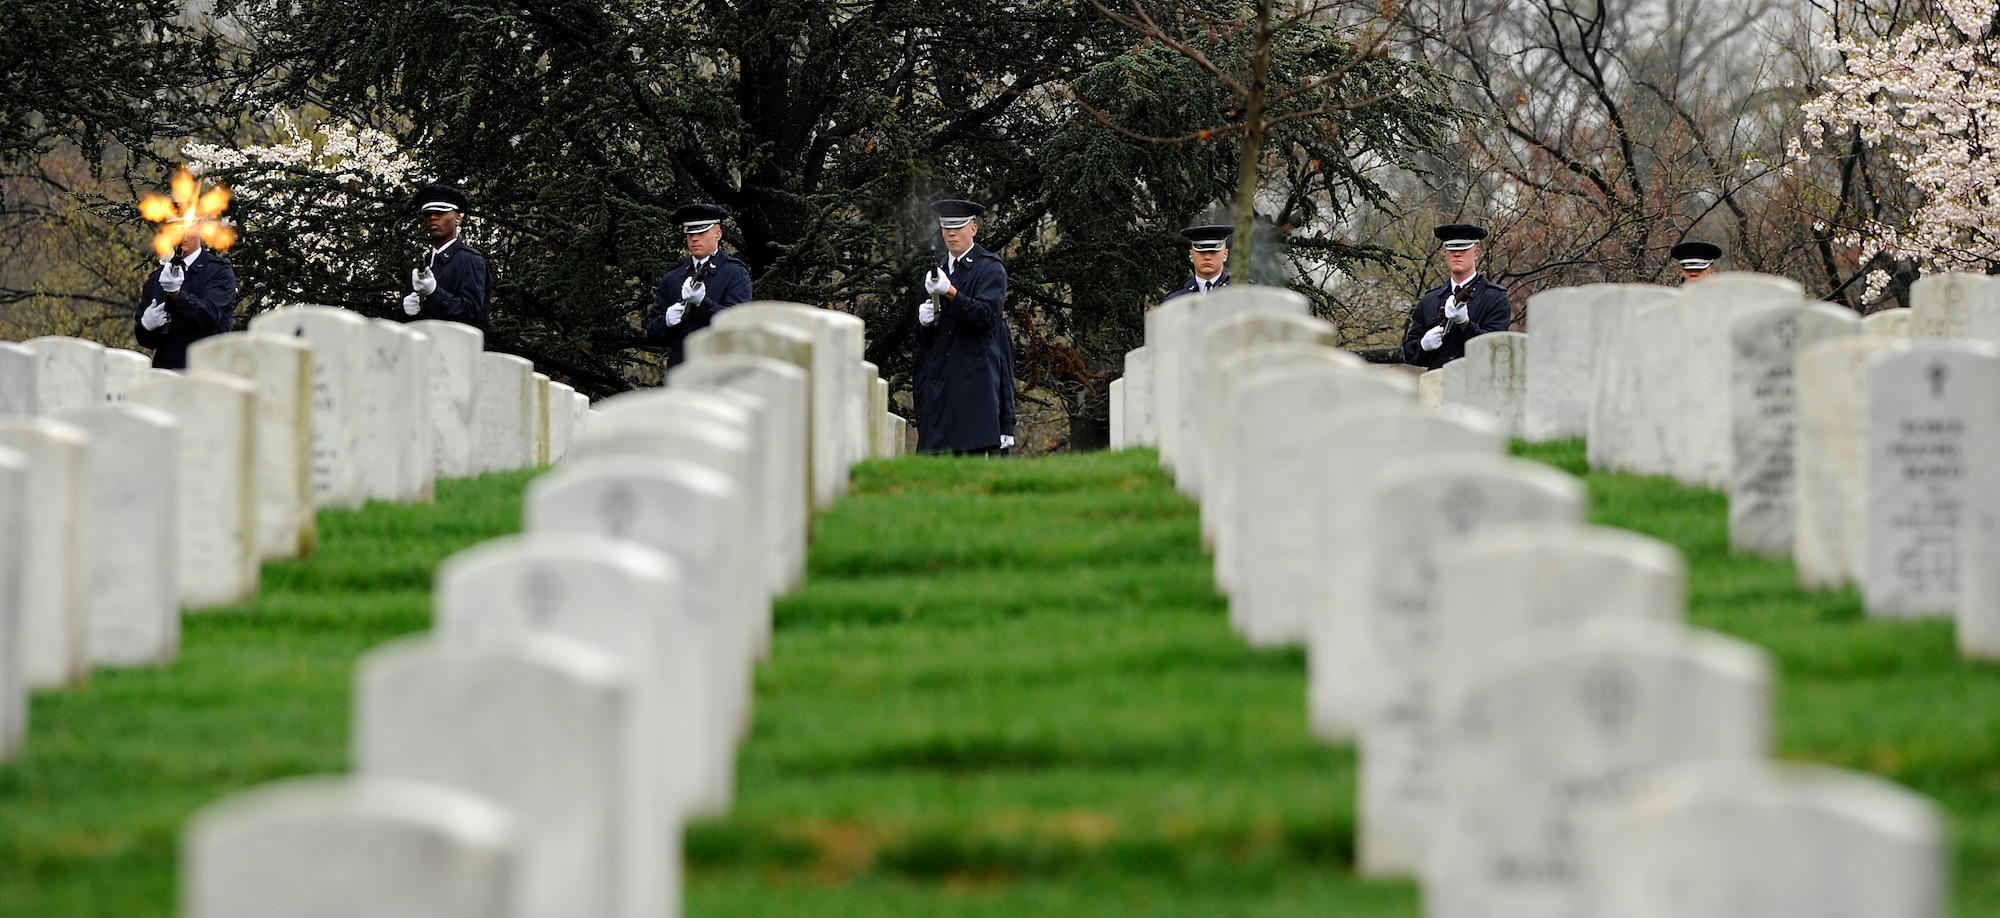 A U.S. Air Force Honor Guard detail fires a rifle volley March 29, 2010, during the full-honors funeral of Maj. Gen. Jeanne M. Holm in Arlington National Cemetery. She was promoted to major general with an effective date of July 1, 1970, and was the first woman in the Armed Forces to serve in that grade. (U.S. Air Force photo/Scott M. Ash)